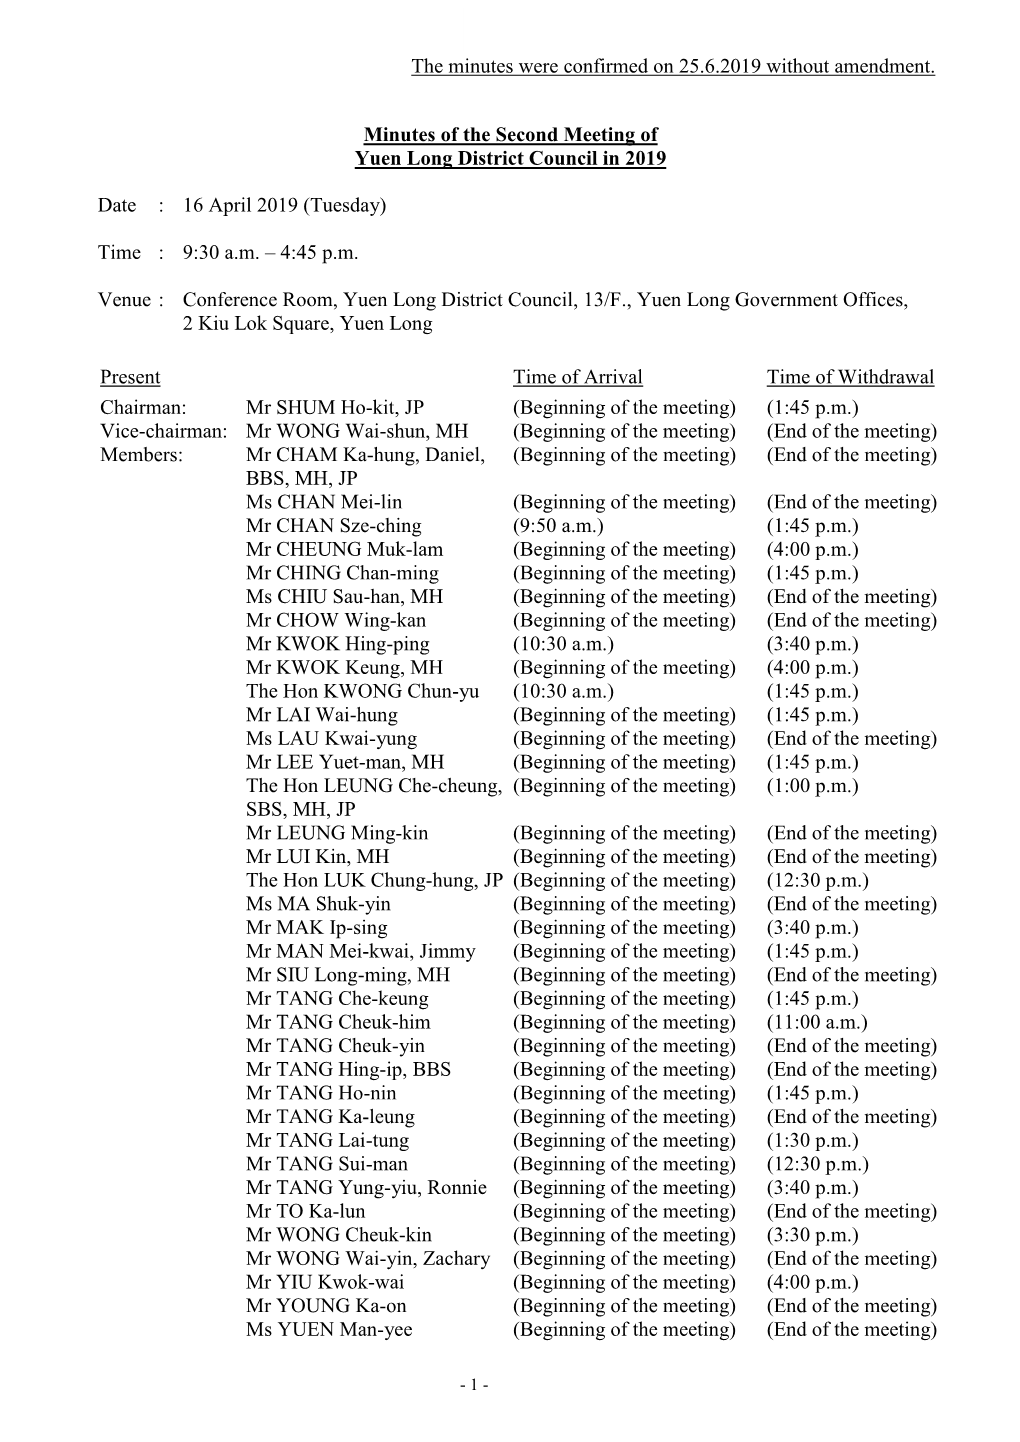 Minutes of the Second Meeting of Yuen Long District Council in 2019